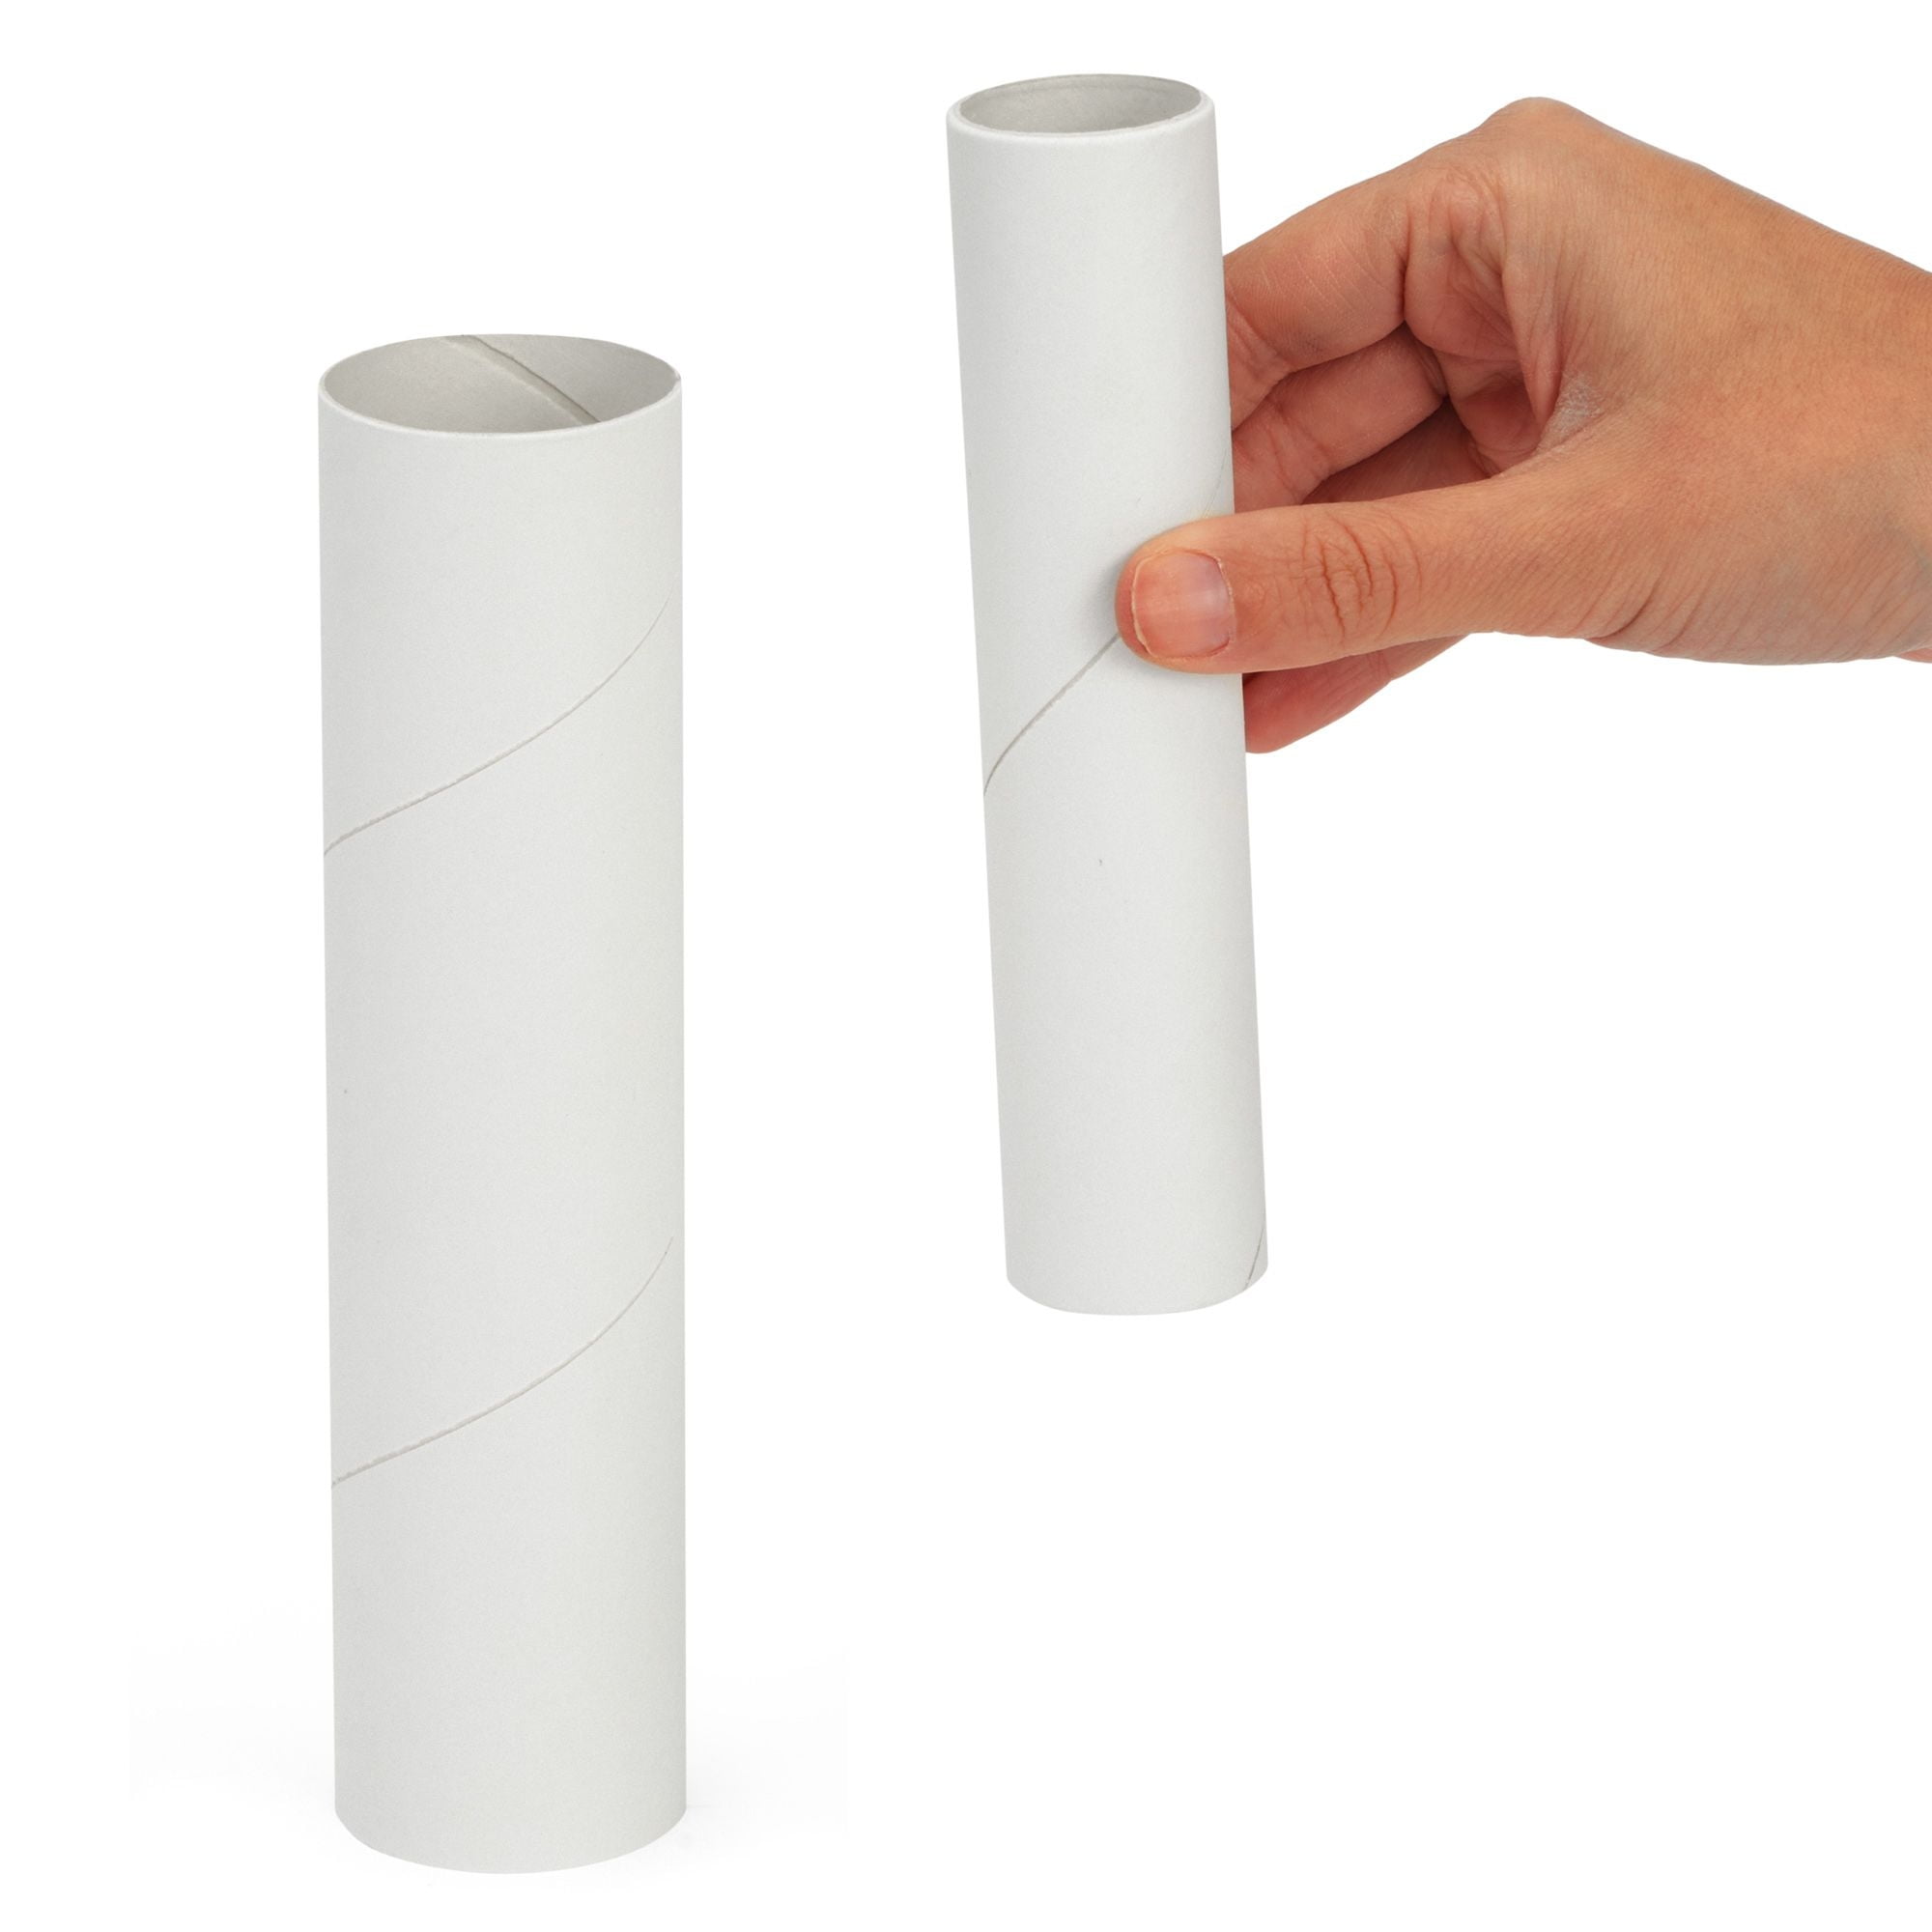 12 Pack White Cardboard Tubes for Crafts, Empty Paper Towels Rolls